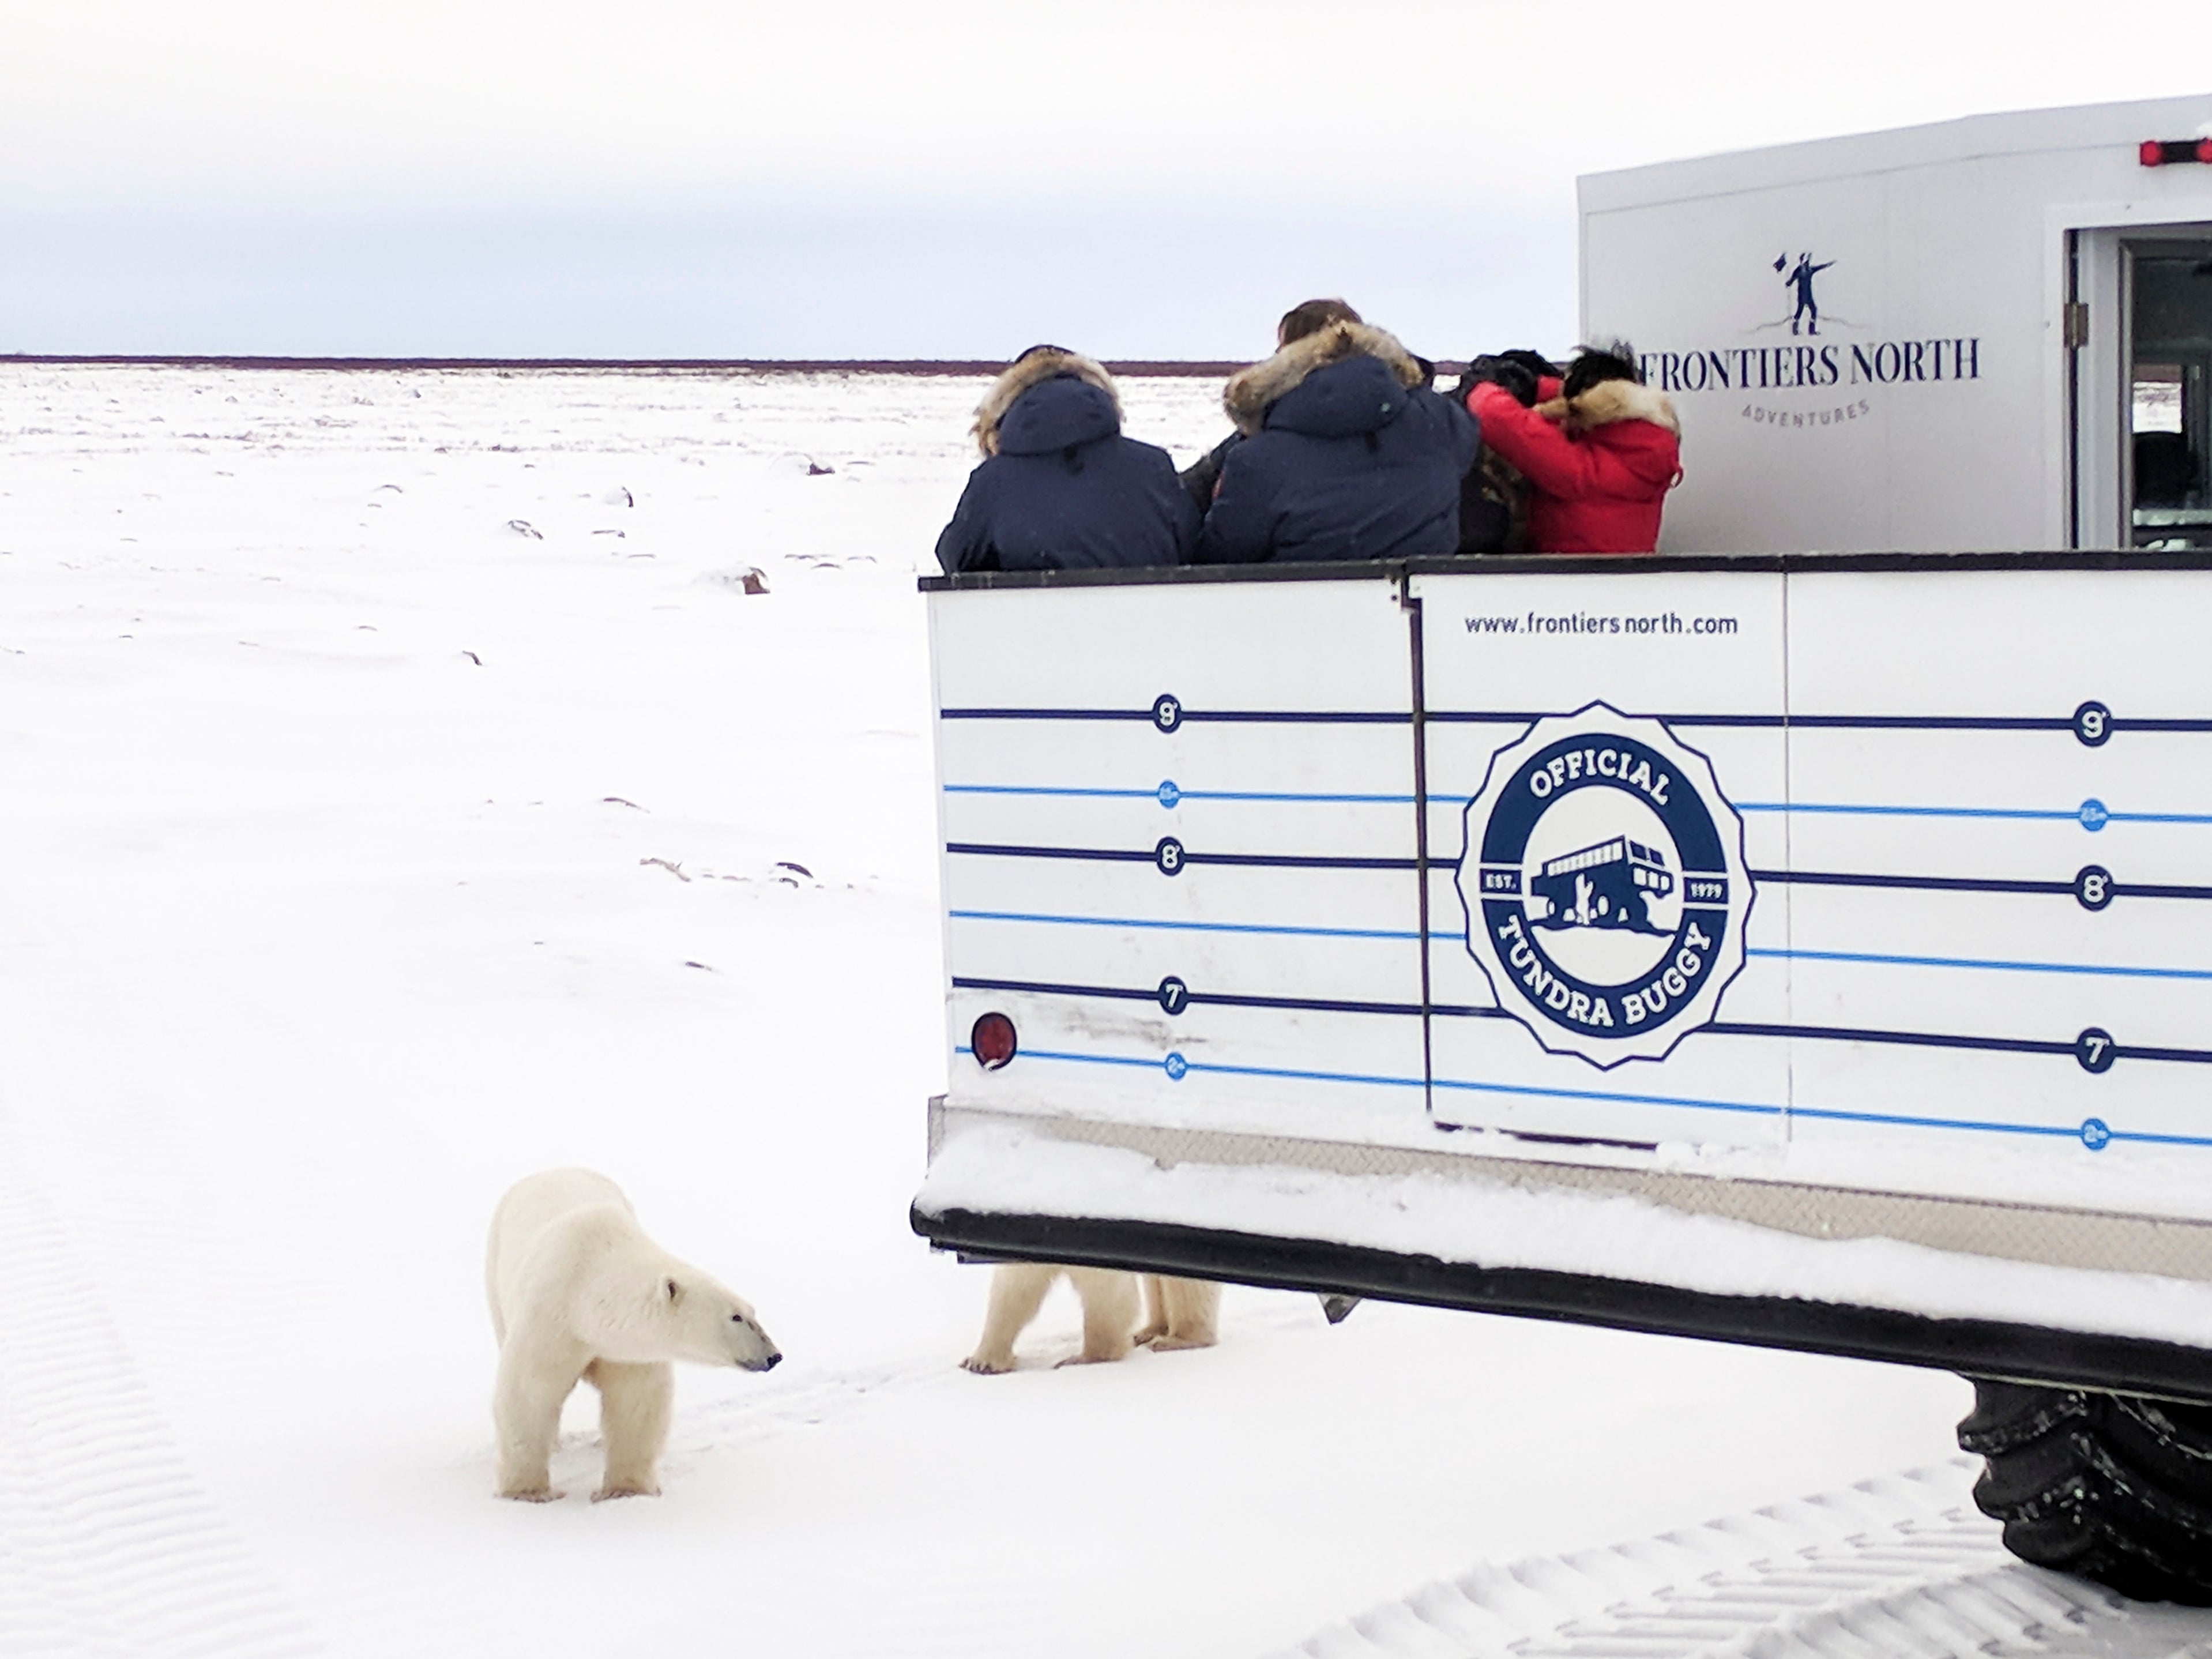 The Tundra Buggy is specially designed for crossing the tundra and has an outdoor viewing platform